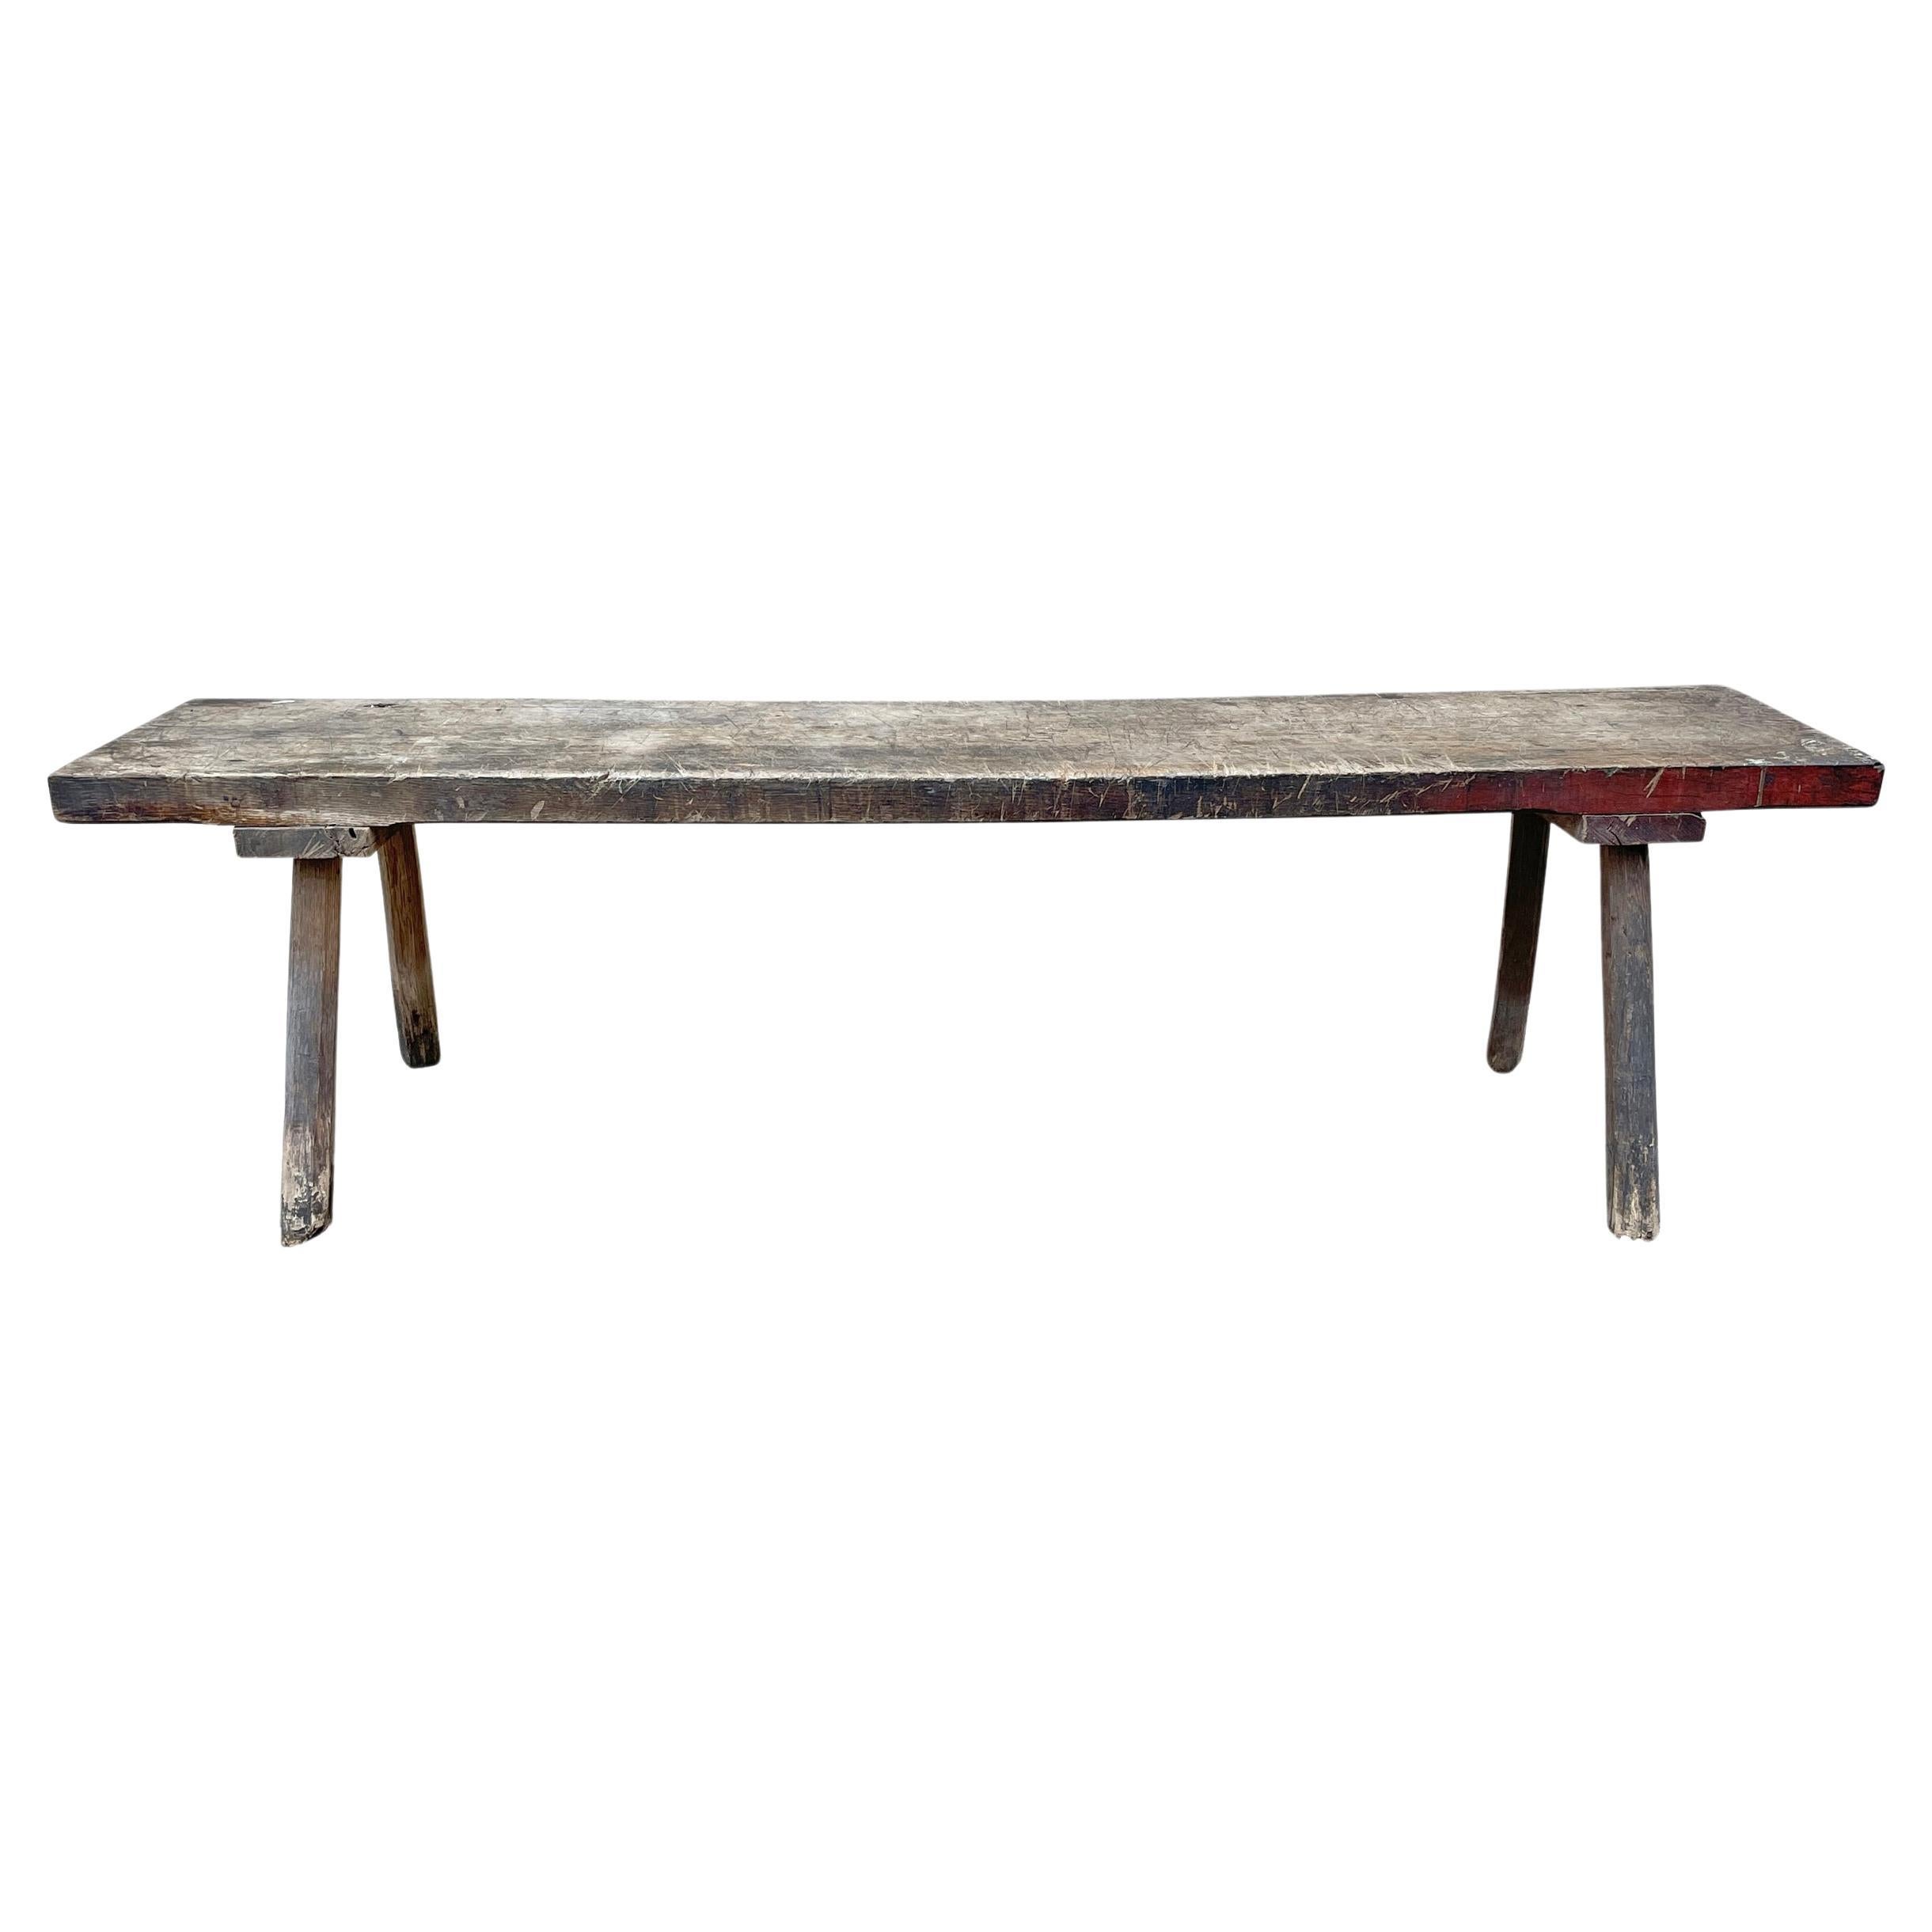 19th Century French Primitive Low Table